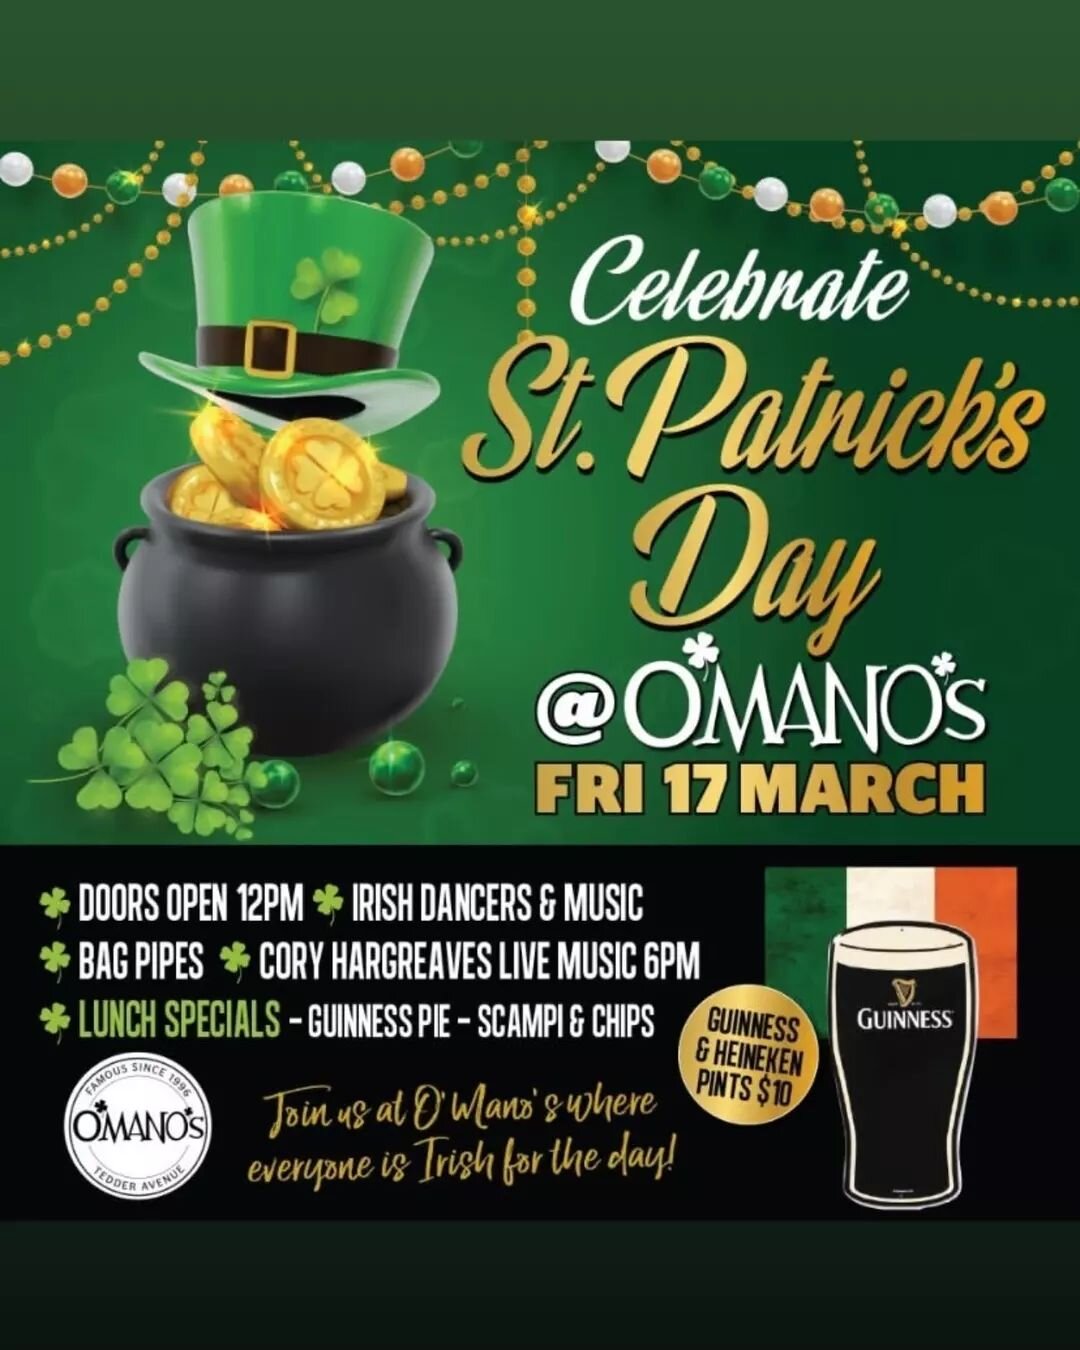 It&rsquo;s St Patrick&rsquo;s Day to be sure! 🍀🧙🏼&zwj;♂️

Head to @manostedderave from 12pm for all the festivities and join in the celebrations! 🎉